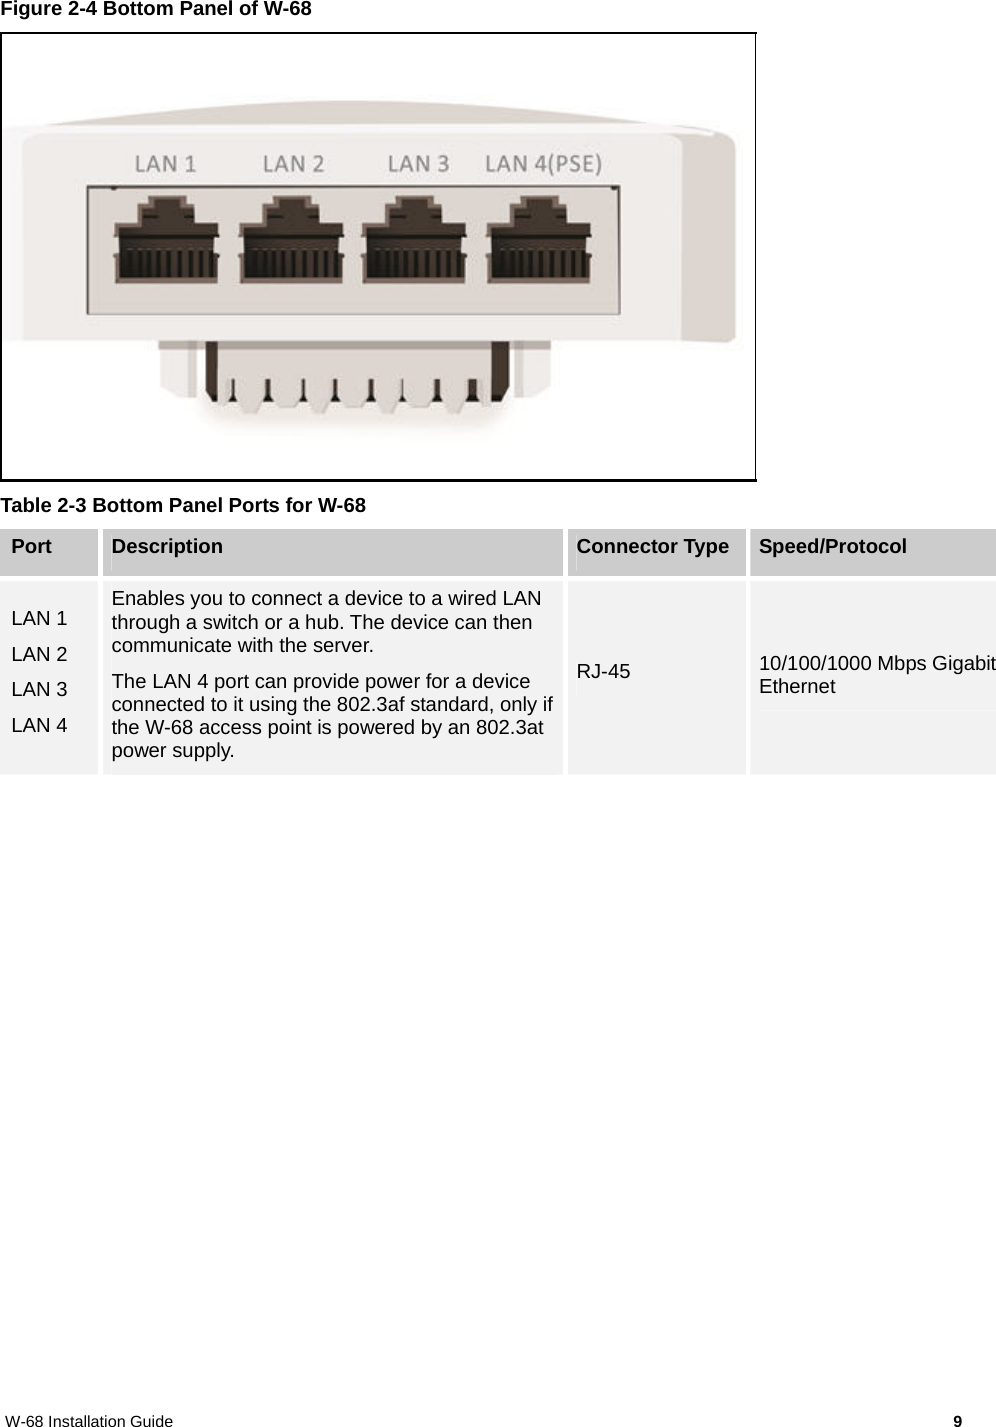 W-68 Installation Guide     9 Figure 2-4 Bottom Panel of W-68  Table 2-3 Bottom Panel Ports for W-68 Port  Description  Connector Type Speed/Protocol LAN 1 LAN 2 LAN 3 LAN 4 Enables you to connect a device to a wired LAN through a switch or a hub. The device can then communicate with the server. The LAN 4 port can provide power for a device connected to it using the 802.3af standard, only if the W-68 access point is powered by an 802.3at power supply. RJ-45  10/100/1000 Mbps Gigabit Ethernet  